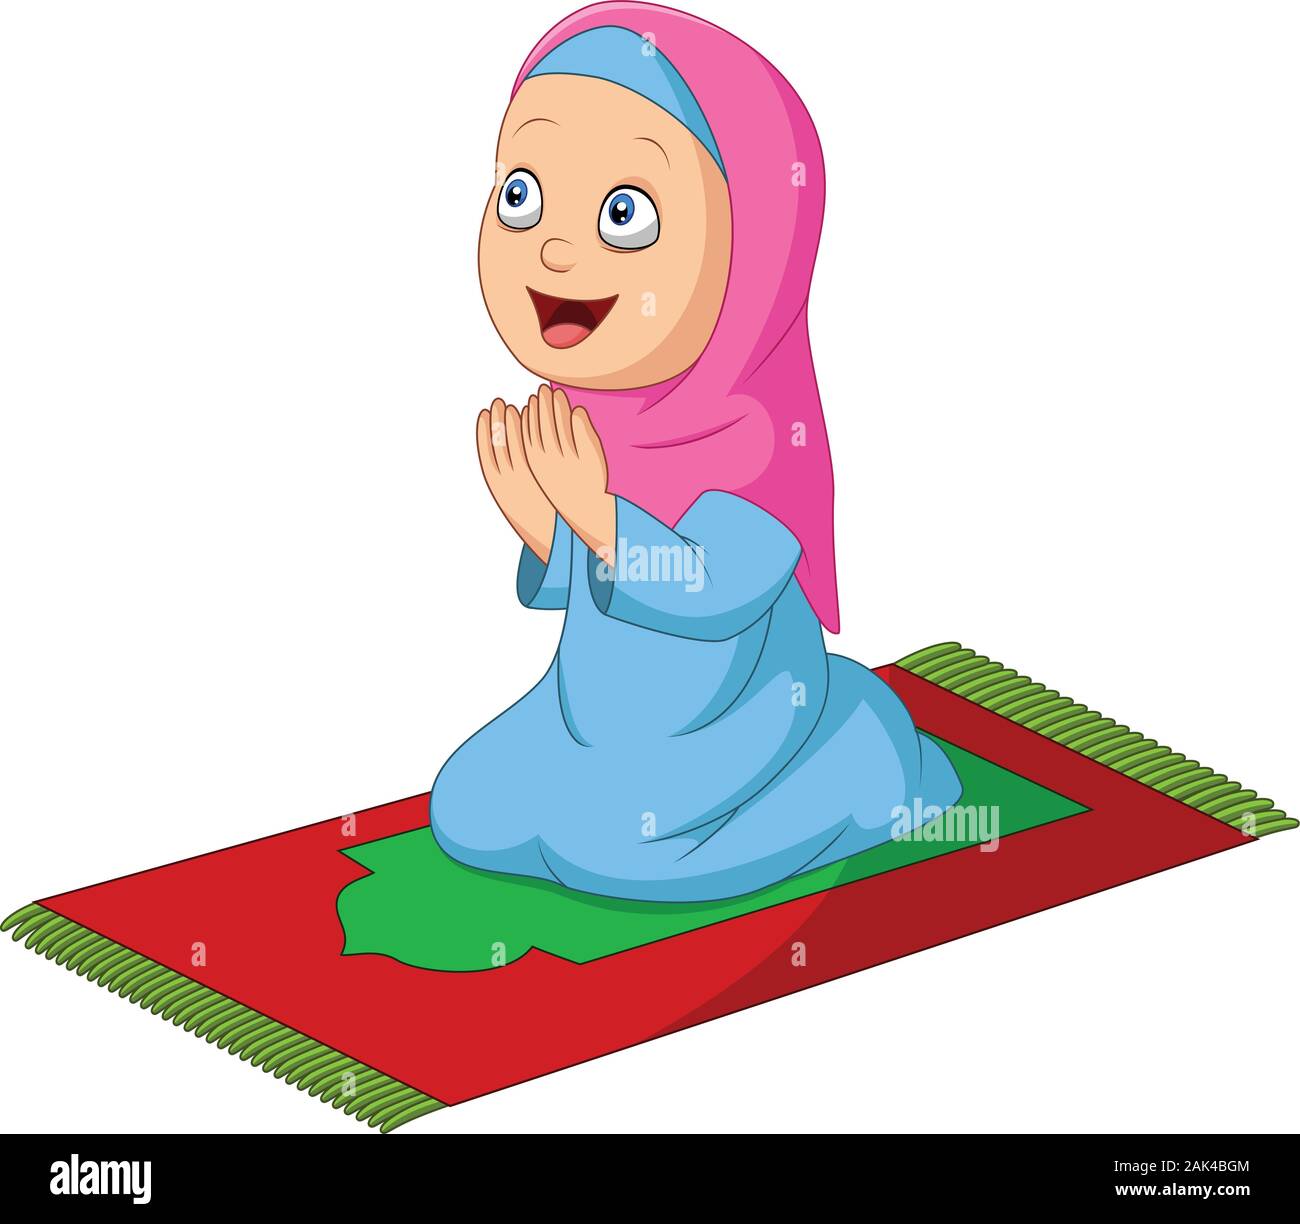 Asian Little Girl Sitting On Stock Vector Images - Alamy